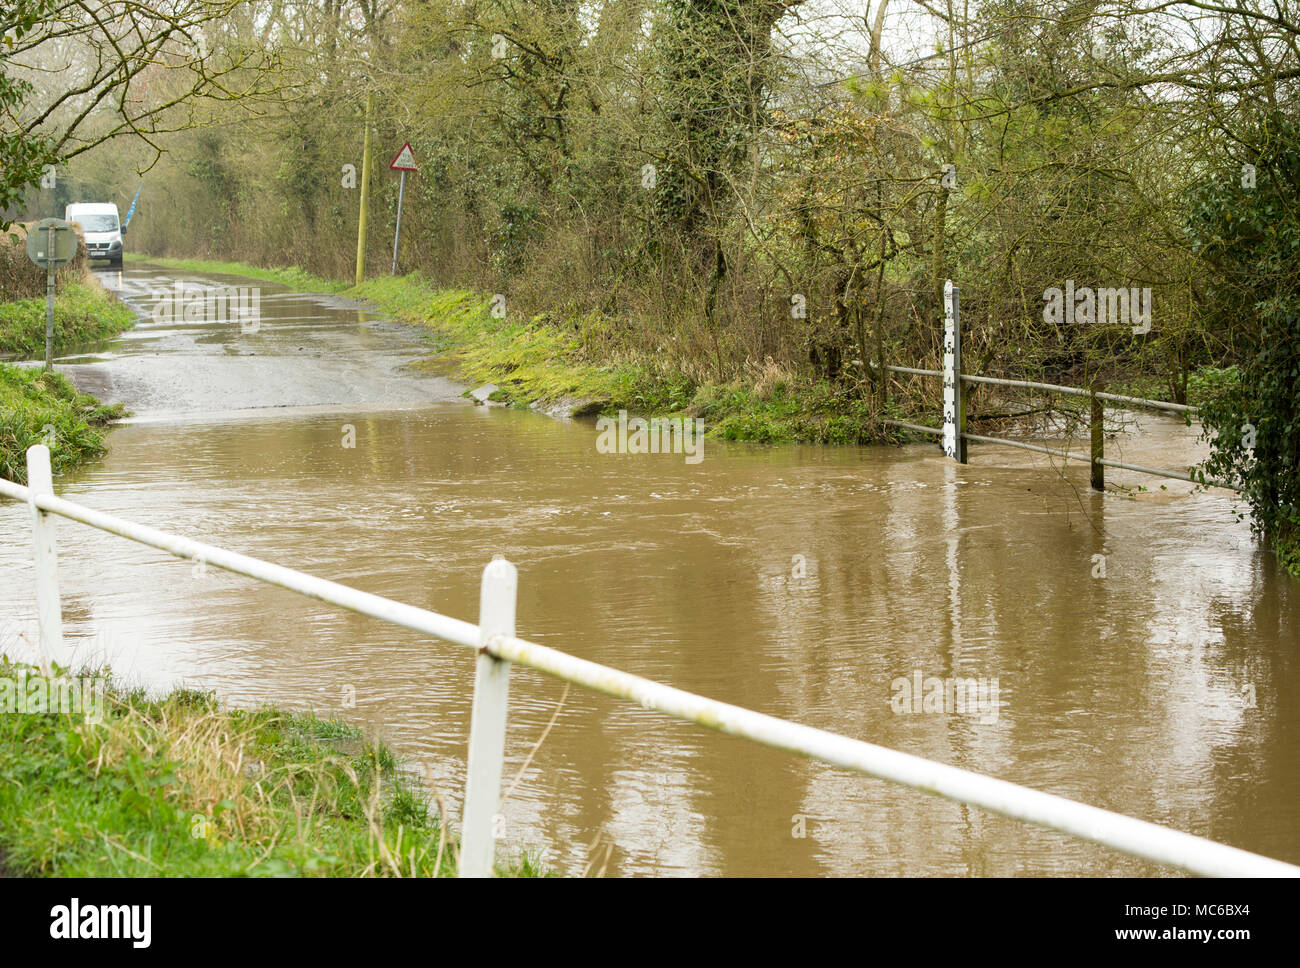 A crossing point at a river ford that is closed due to the river flooding after heavy rain, Dorset England UK Stock Photo